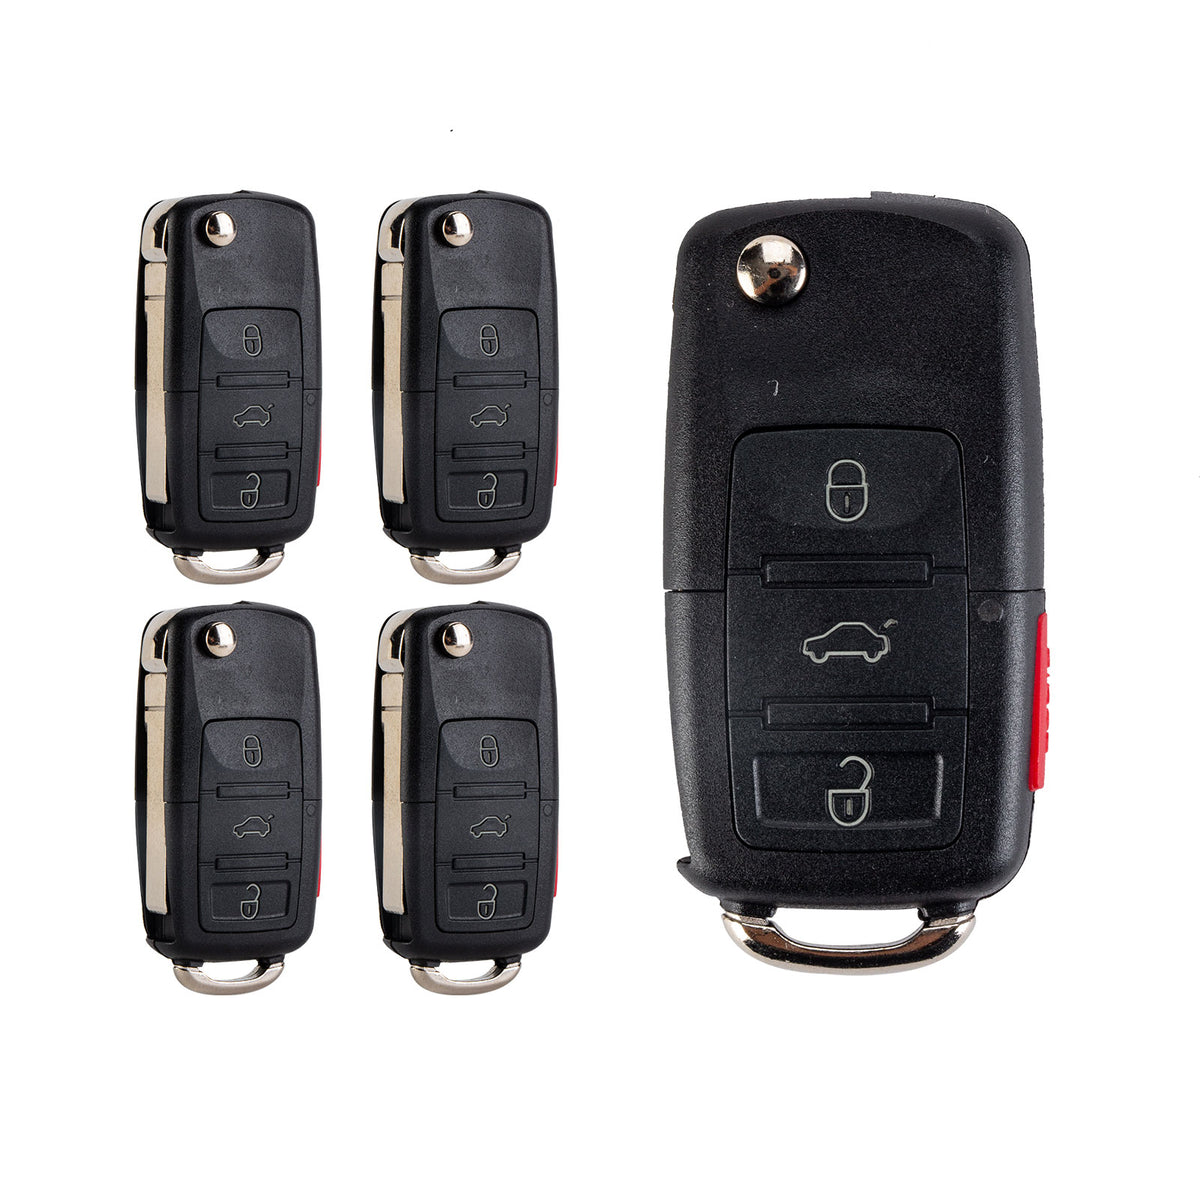 Keyless Entry Remote Replacement for 2002-2006 Beetle 2003-2005 Golf 2002-2005 Passat 2002-2004 Jetta 315MHZ NBG735868T  KR-V4SA-05